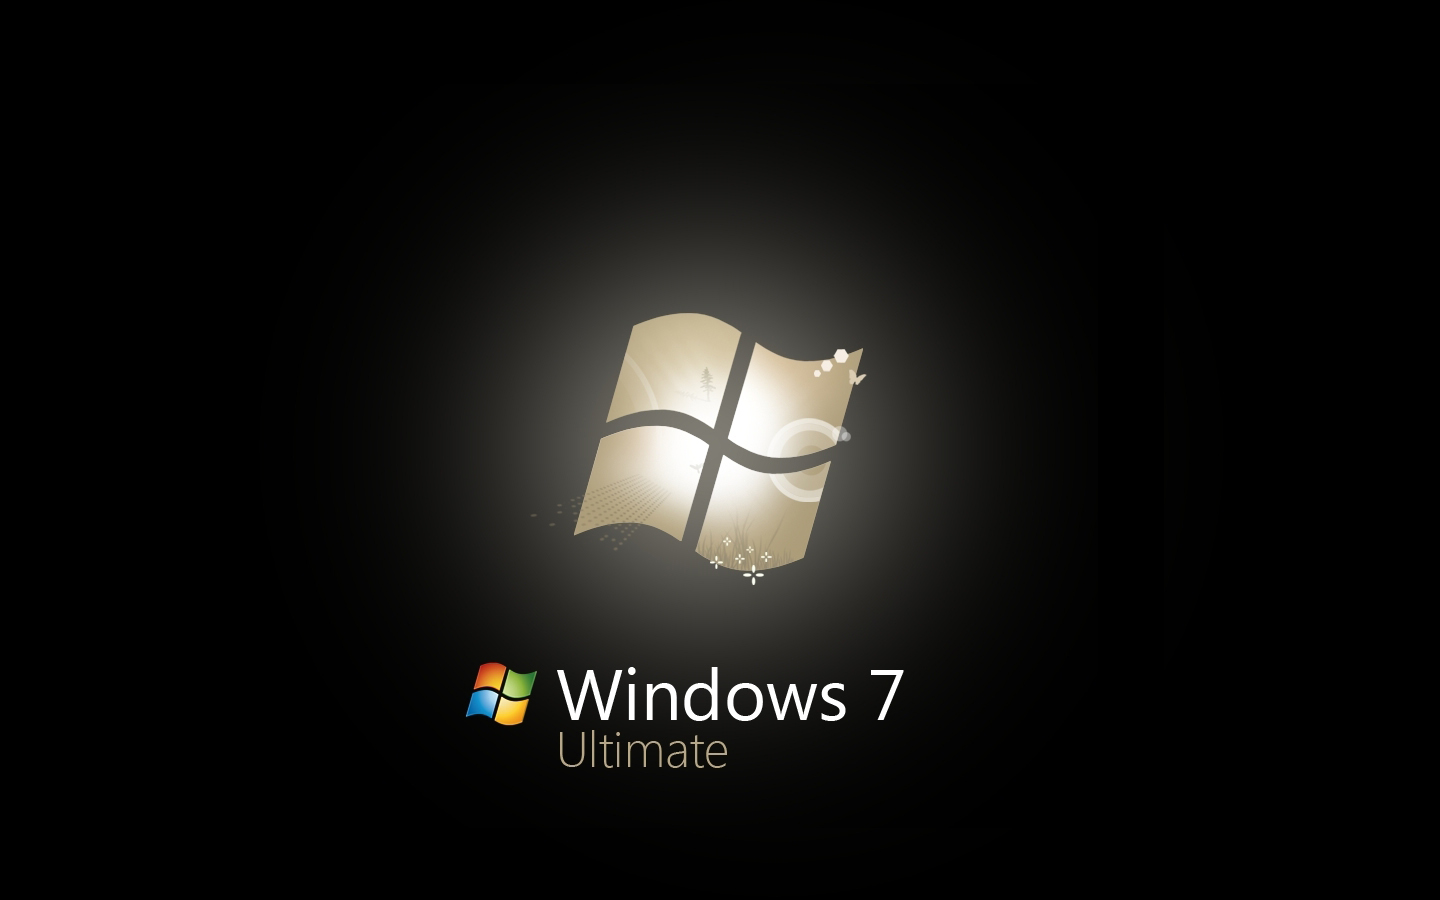 Free Download Windows Ultimate Black Edition Free Wallpapers 1440x900